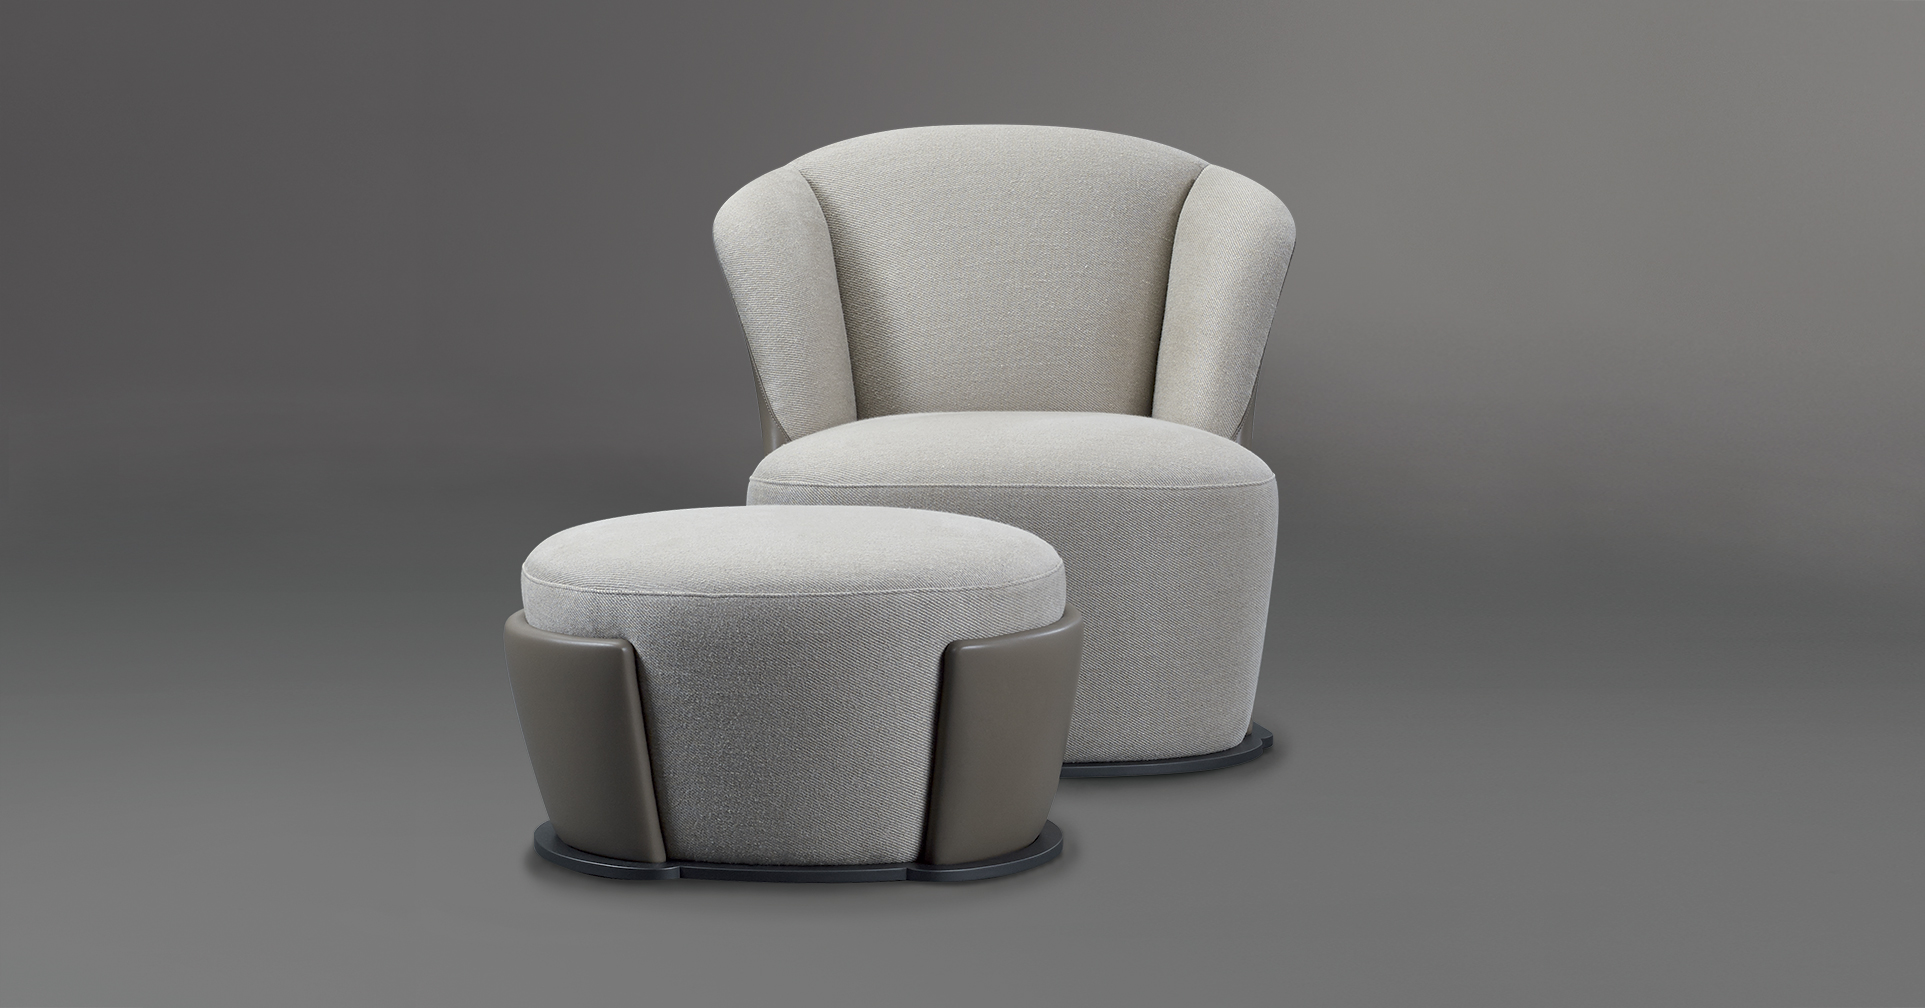 Rosaspina is an armchair with fabric and leather covering and a metal base, from Promeomoria's catalogue | Promemoria